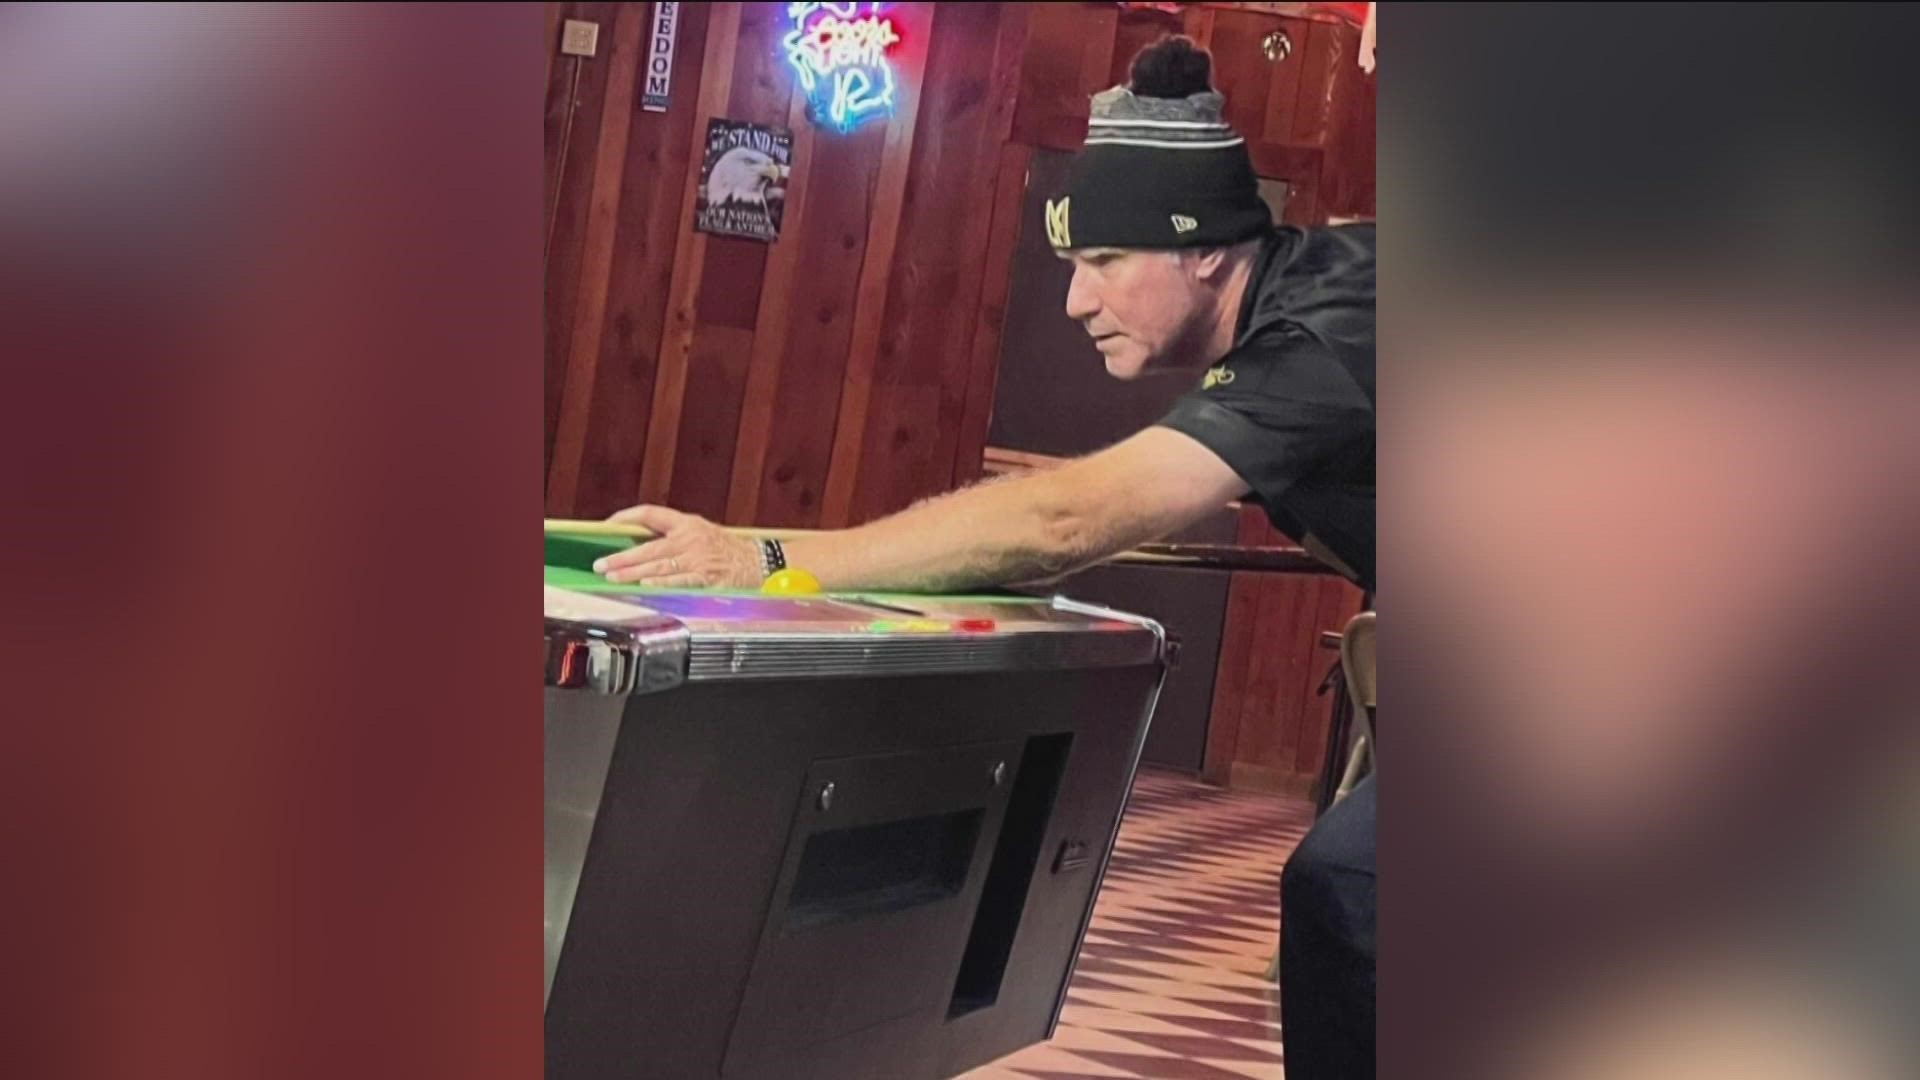 Perks Place is a staple in Mackay, which has a population of about 500 people. Ferrell made a stop at the Idaho bar amid a fly fishing trip with some friends.